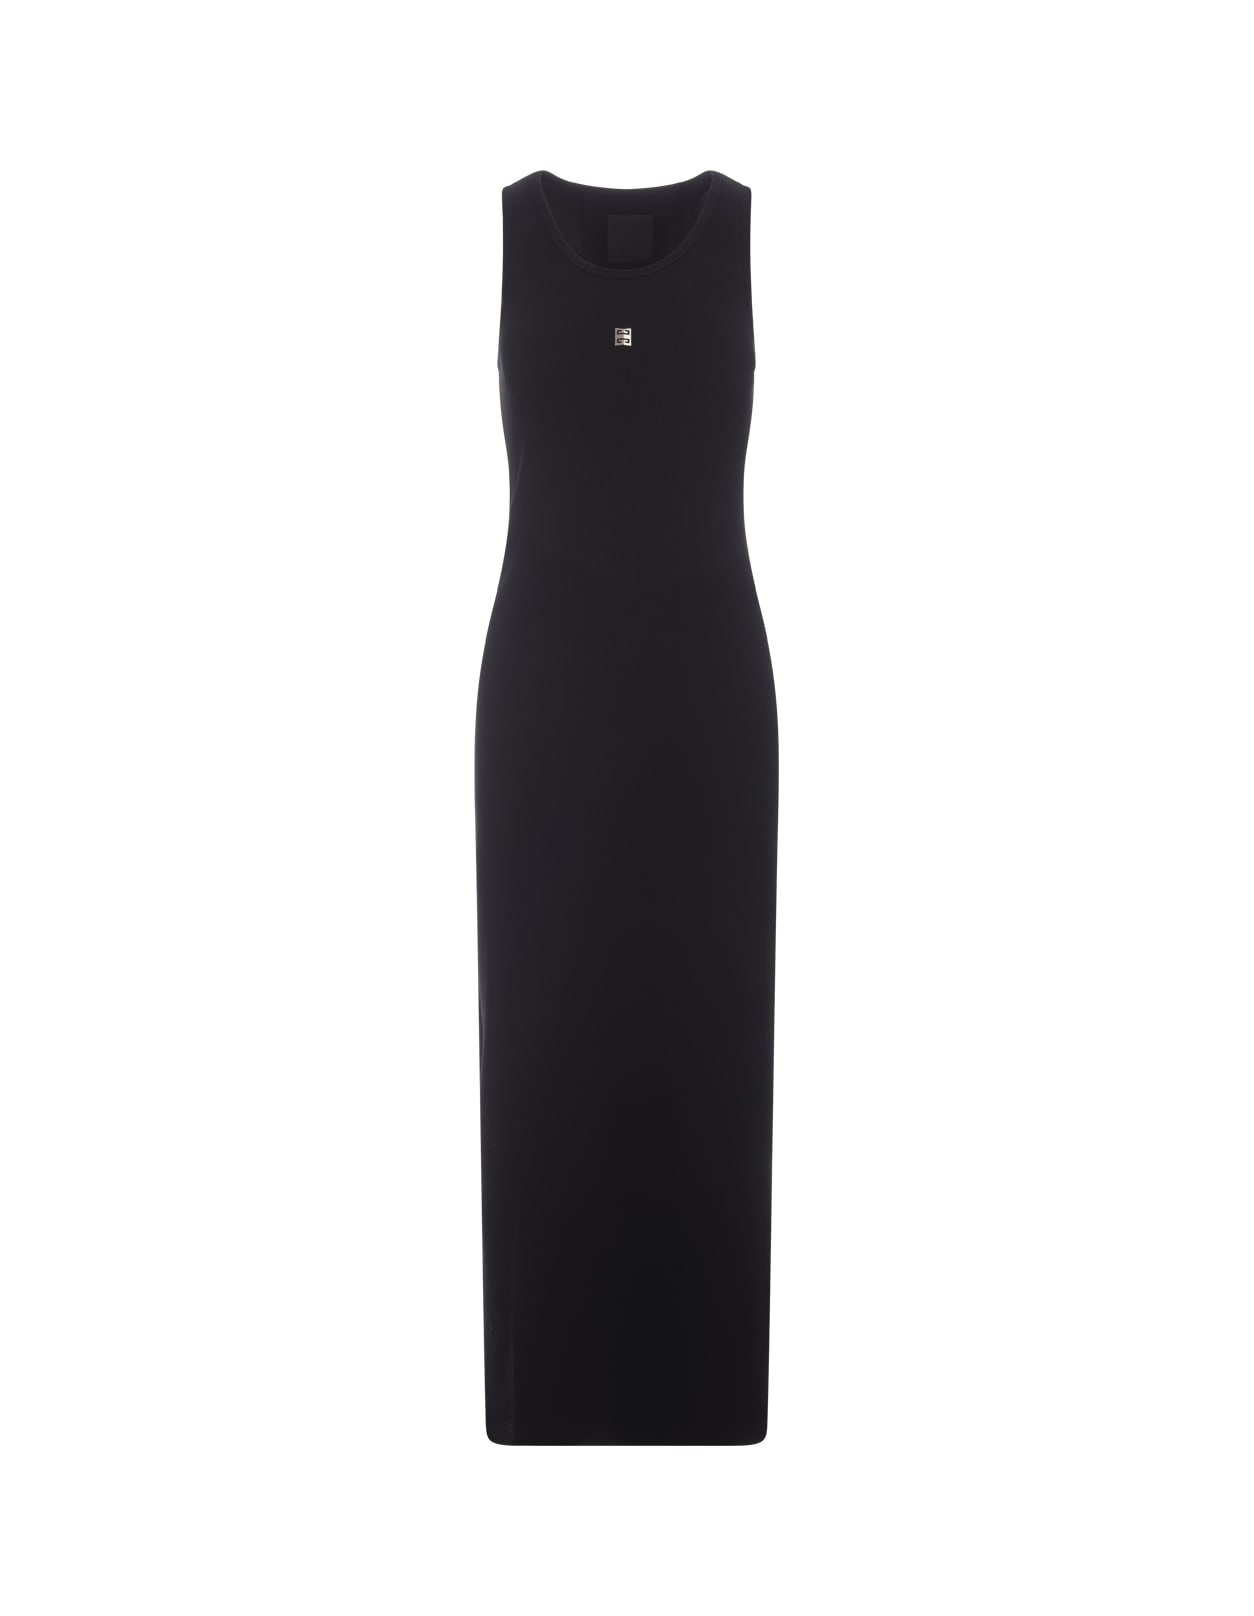 Givenchy Black Knitted Long Tank Top Dress